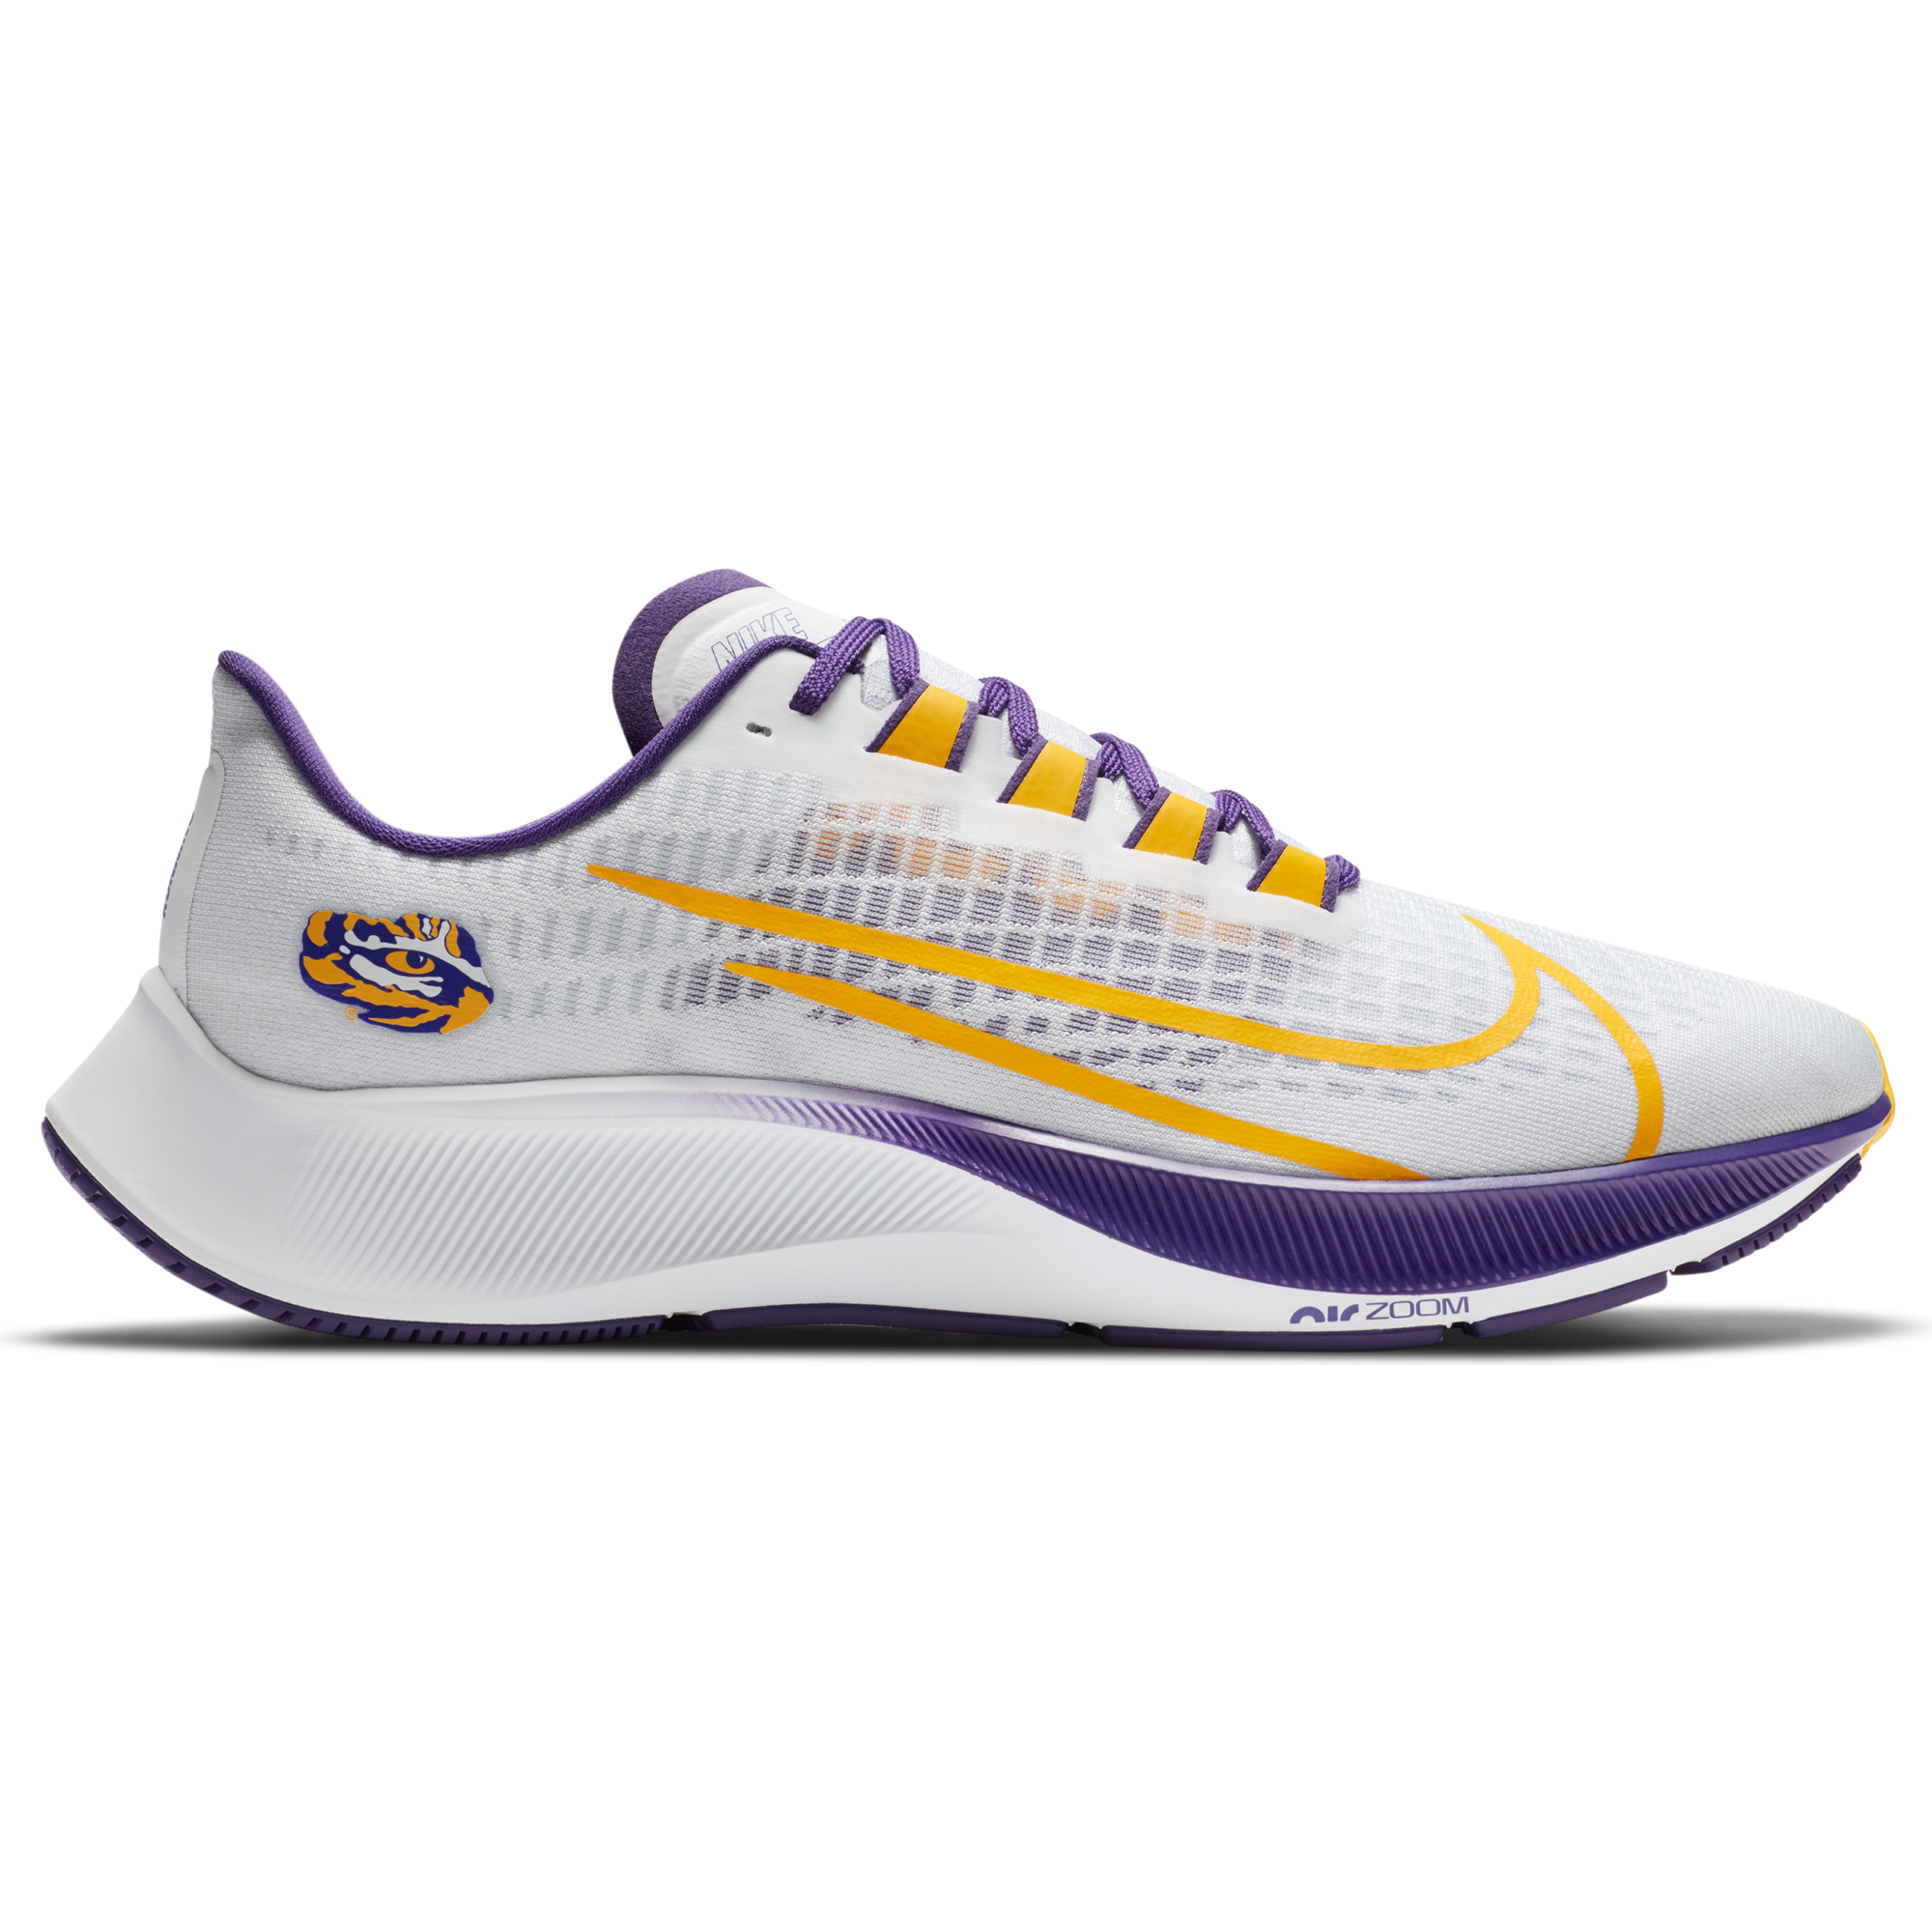 clemson tigers nike shoes cheap online